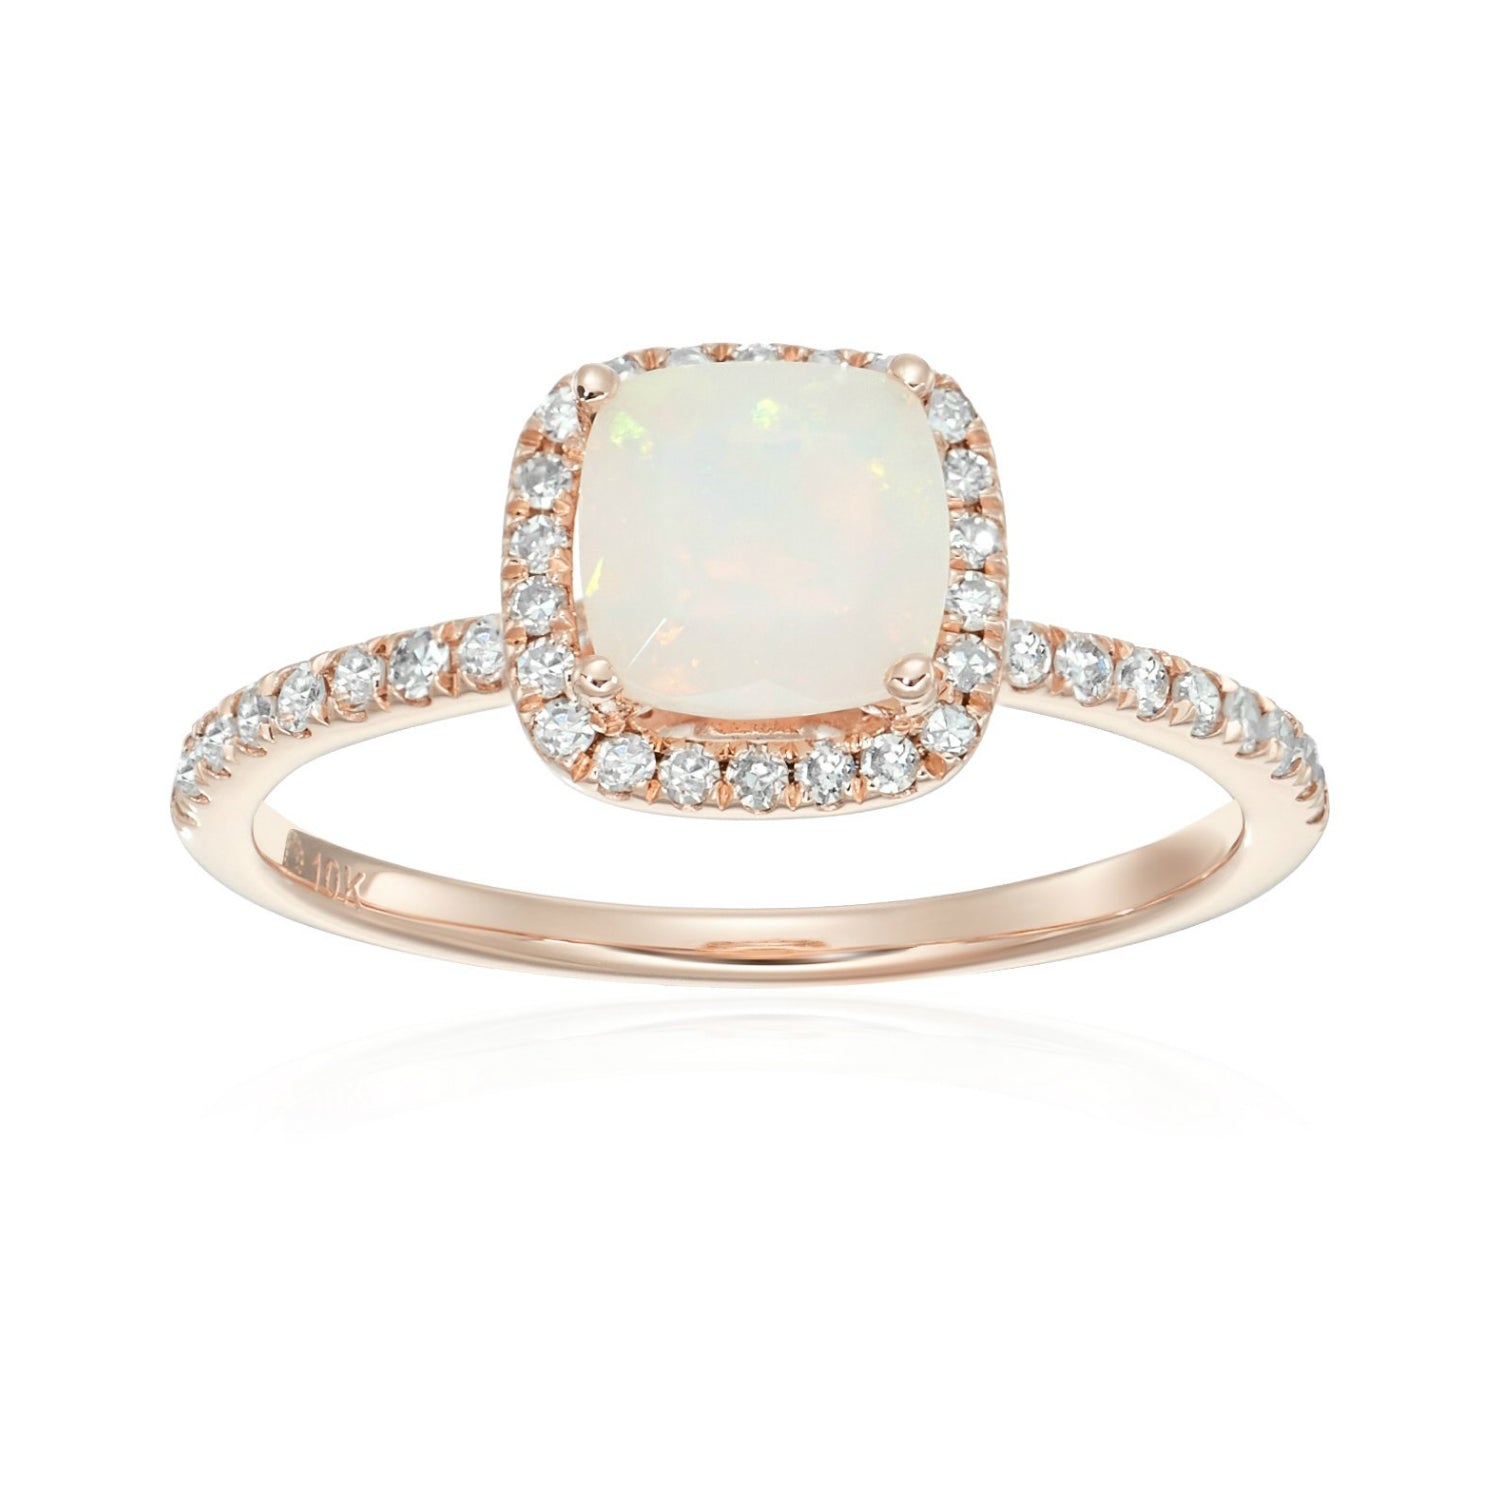 10k Rose Gold Ethiopian Opal and Diamond Cushion Halo Engagement Ring  (1/4cttw, H-I Color, I1-I2 Clarity),